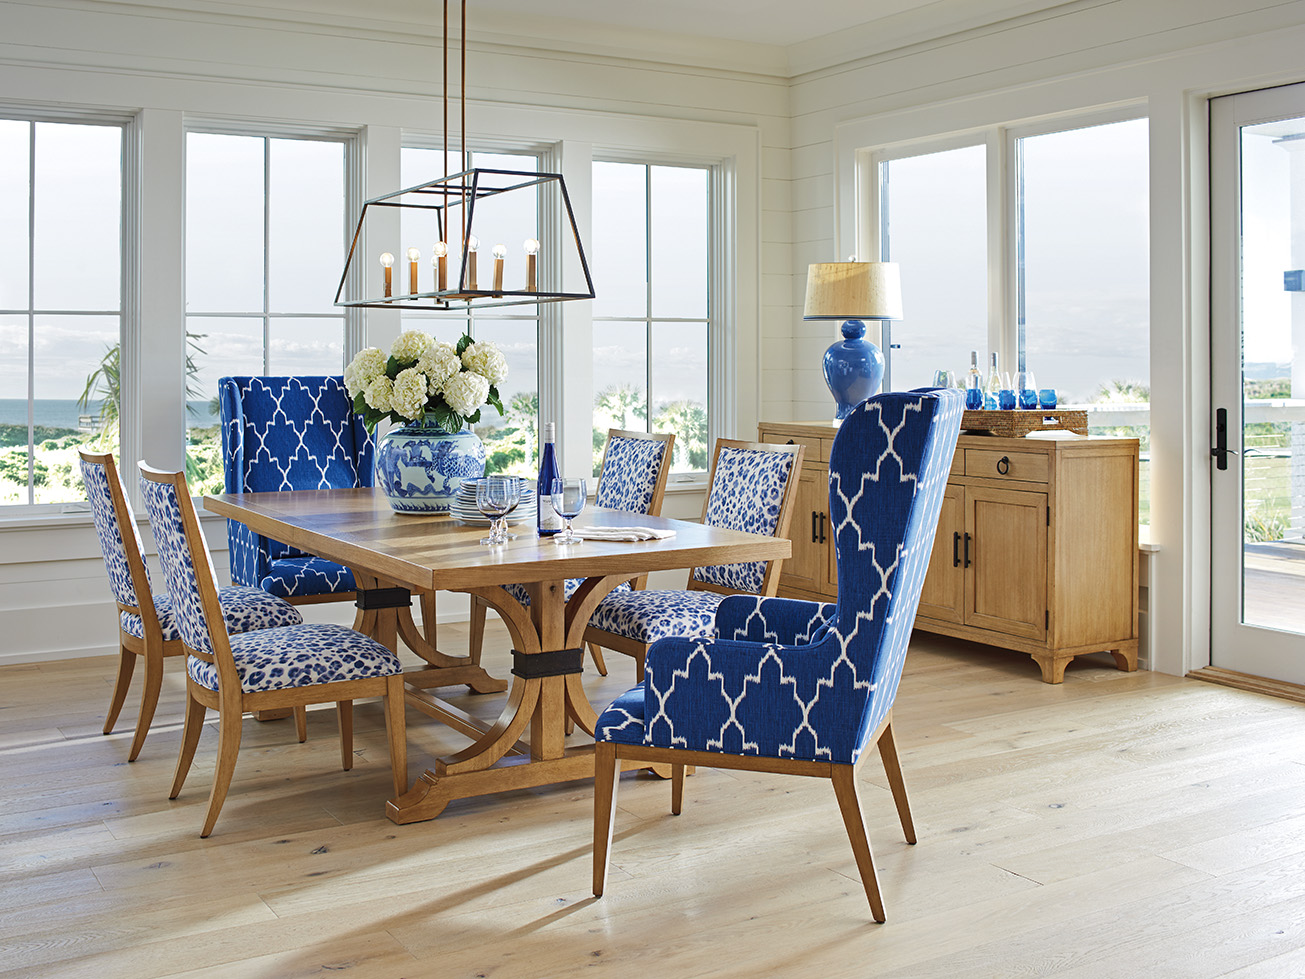 a dining room table with blue and white chairs